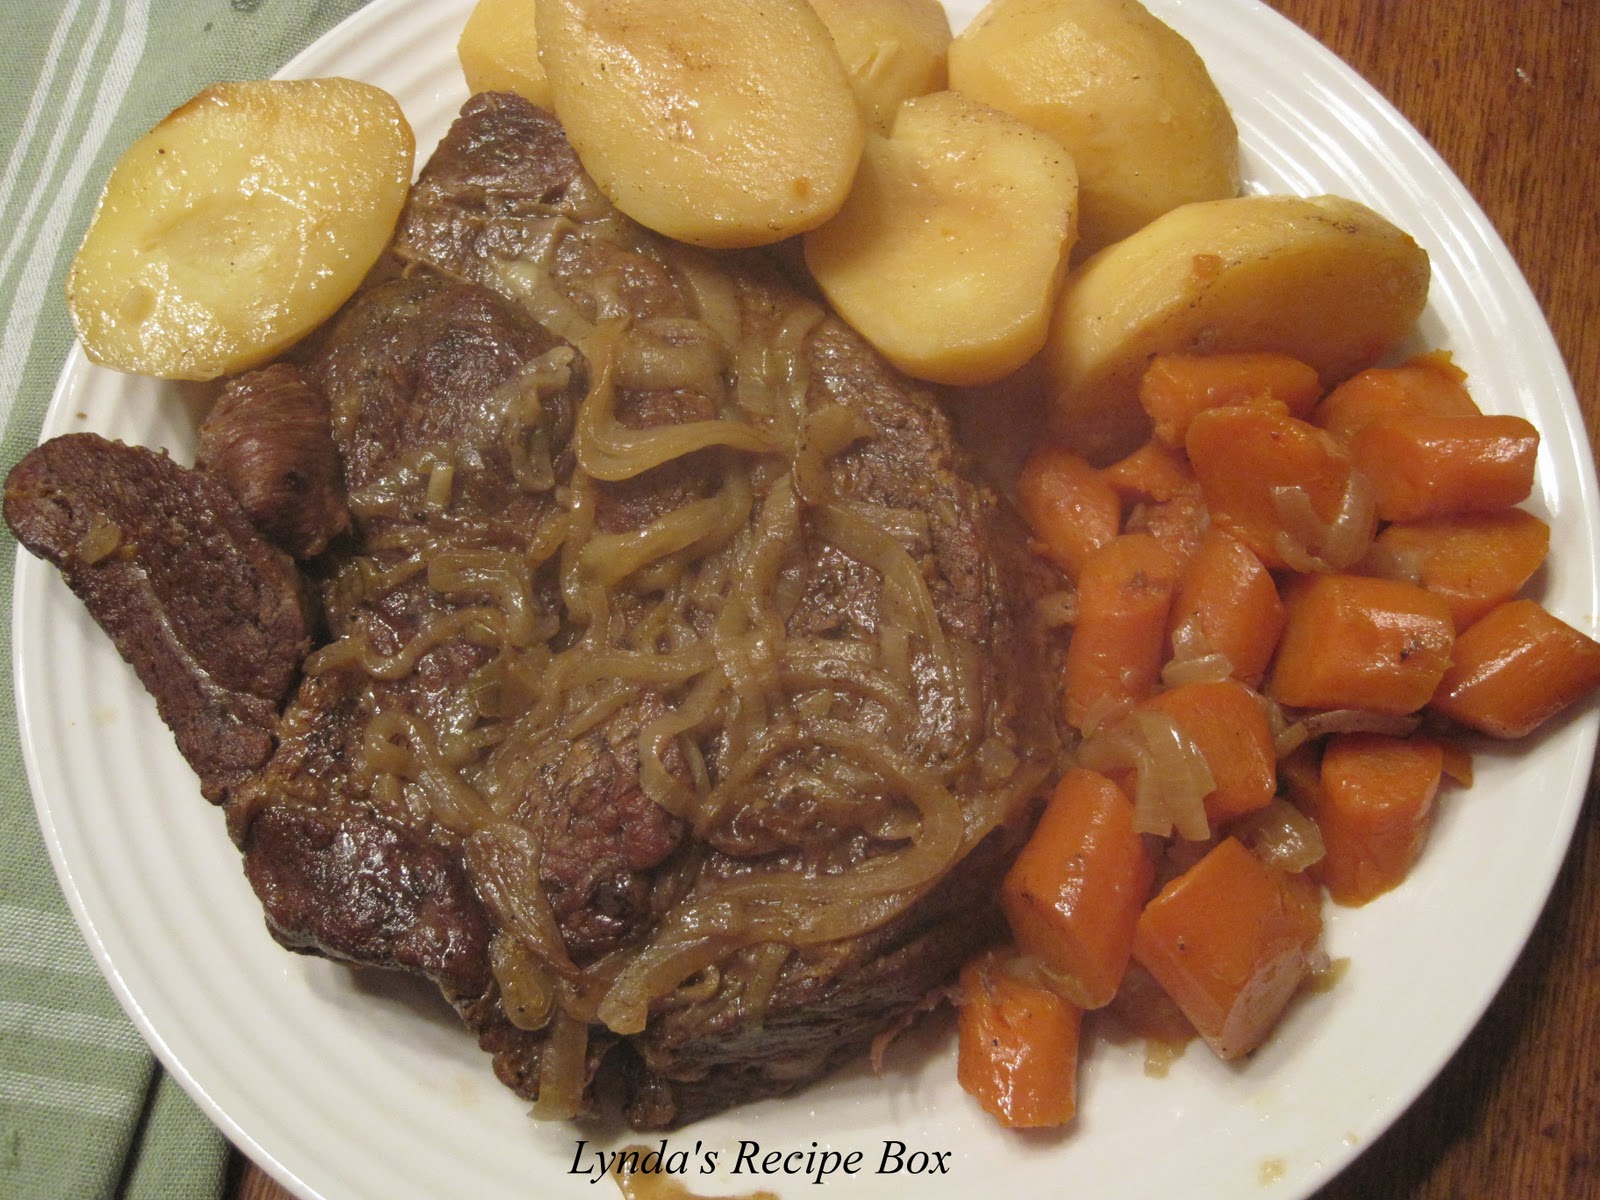 Lynda's Recipe Box: How to Cook a Tender, Oven Braised, Beef Pot Roast